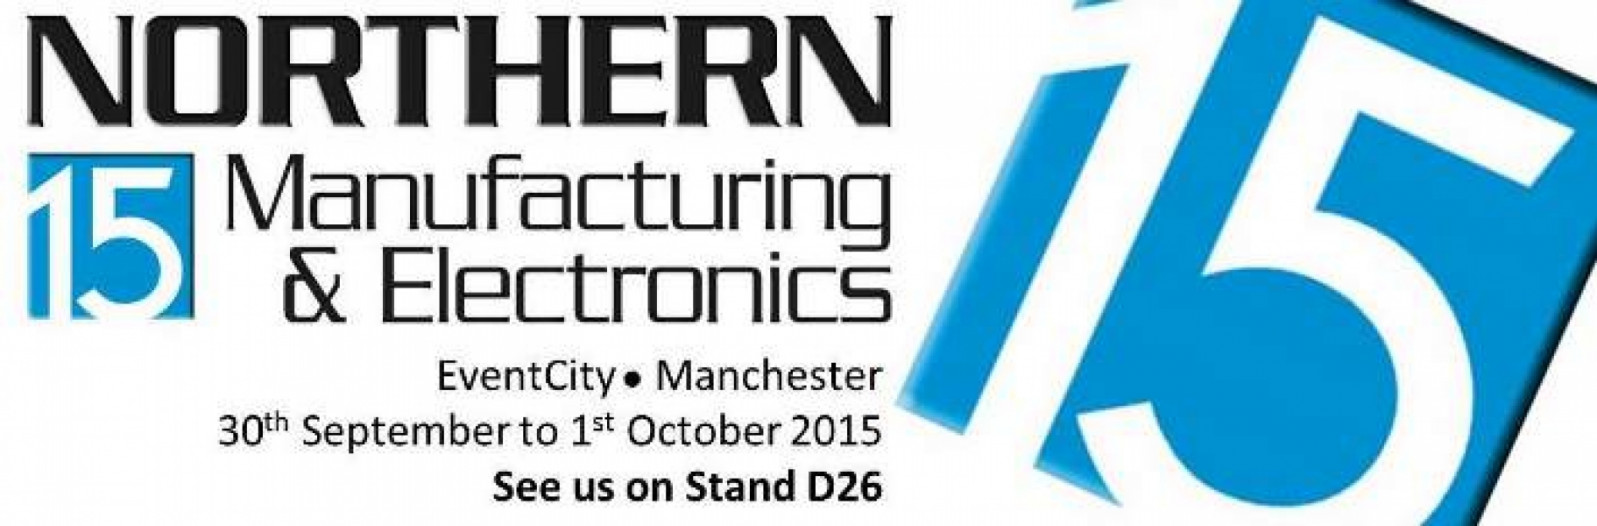 Exhibiting at Northern Manufacturing Exhibition